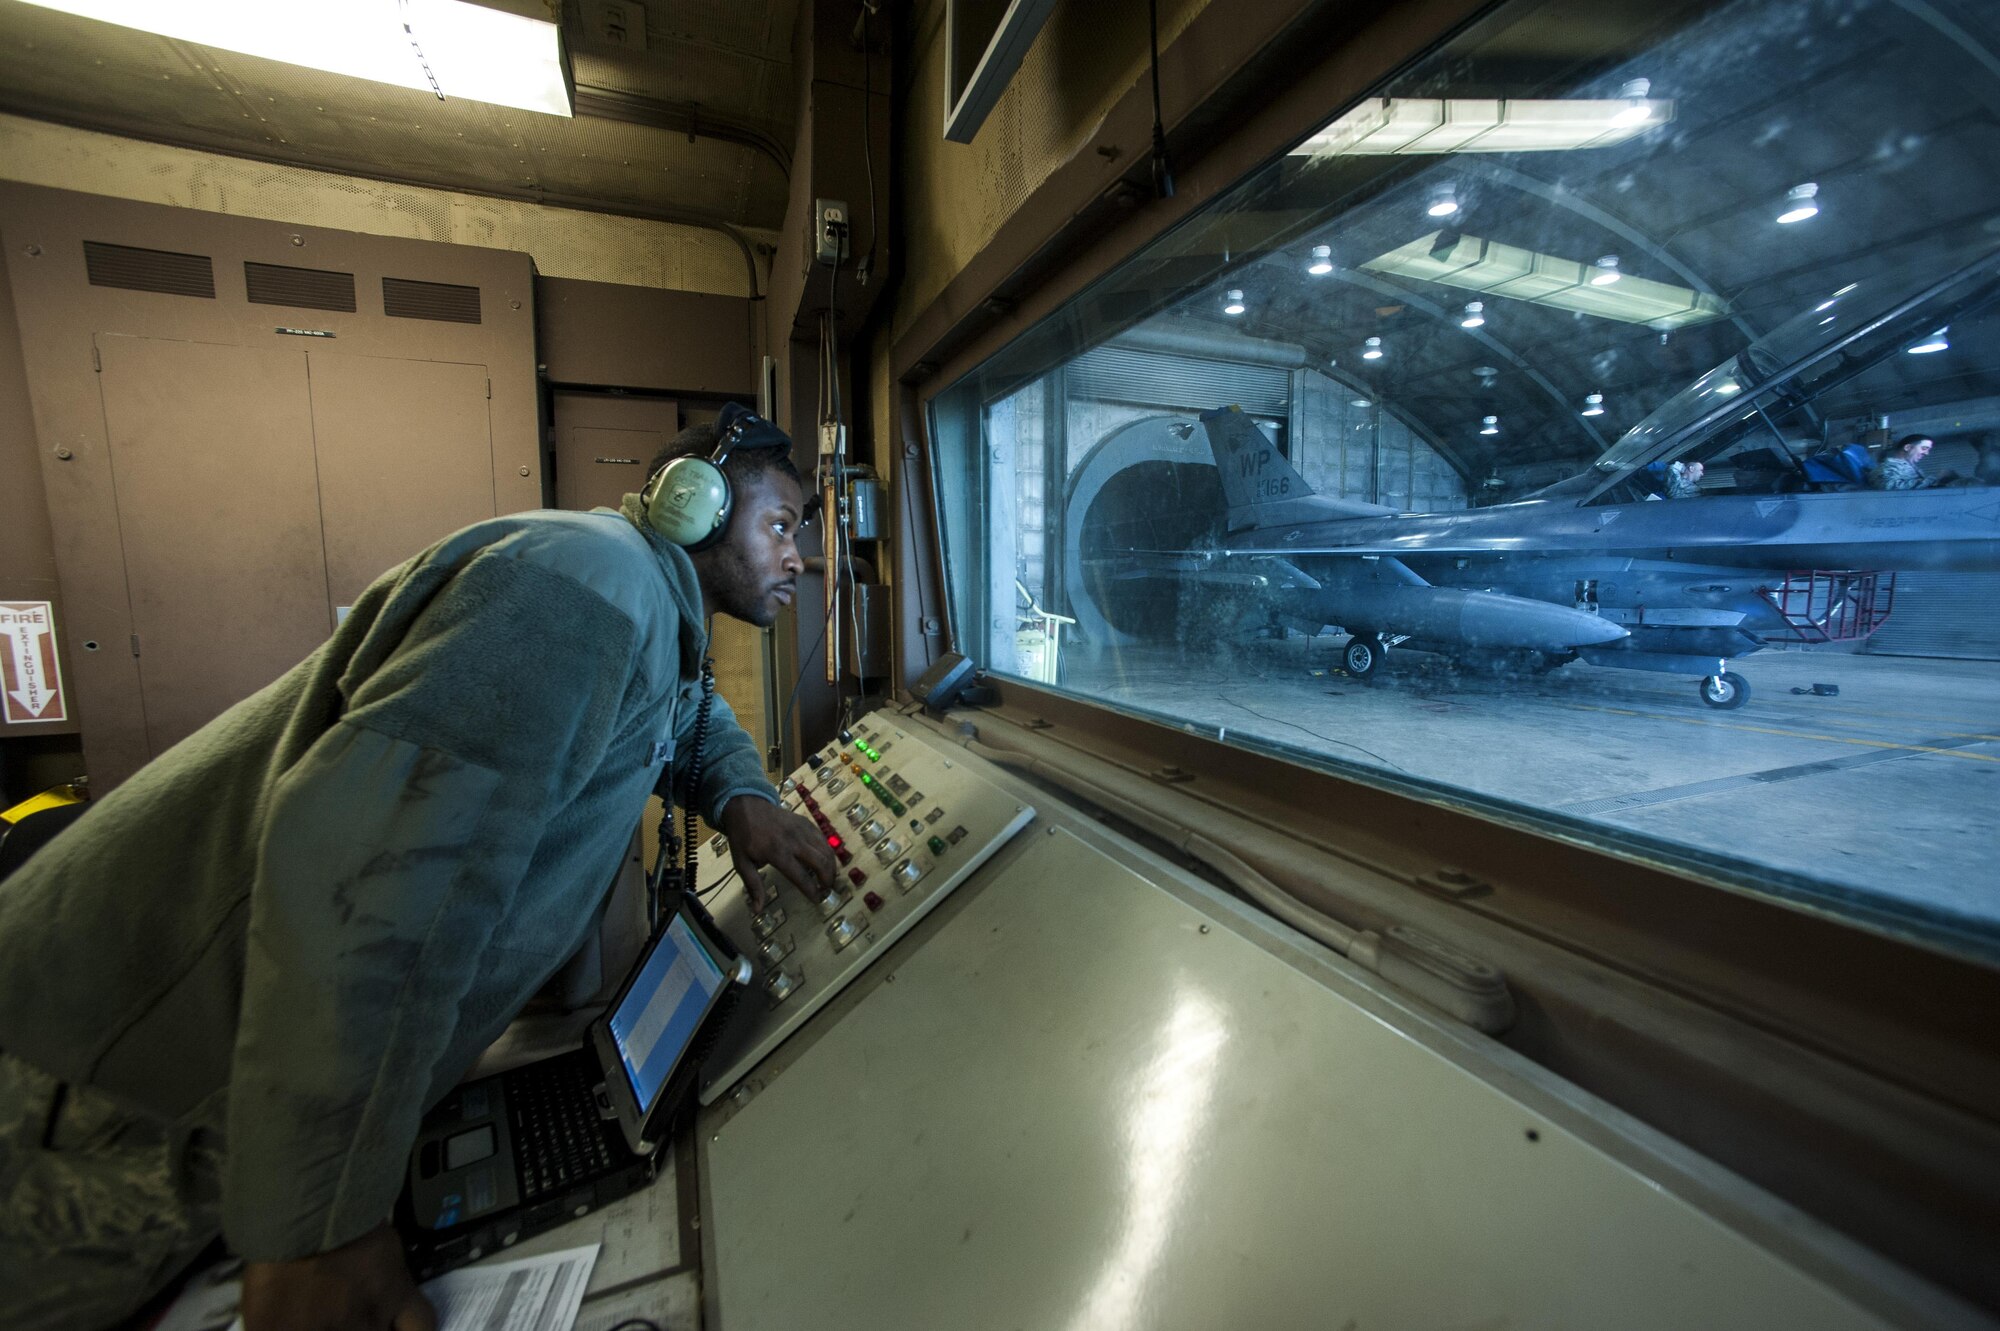 Tech. Sgt. Rowland Thagard, 8th Maintenance Squadron assistant propulsion section chief, oversees Airmen during an engine test in a hush house at Kunsan Air Base, Republic of Korea, Dec. 9, 2015. In addition to the hush house, the 8th MXS maintenance flight encompasses multiple duty sections, which include a tire shop, aerospace propulsion, crash damage, aircraft recovery and phase.  (U.S. Air Force photo by Staff Sgt. Nick Wilson/Released)